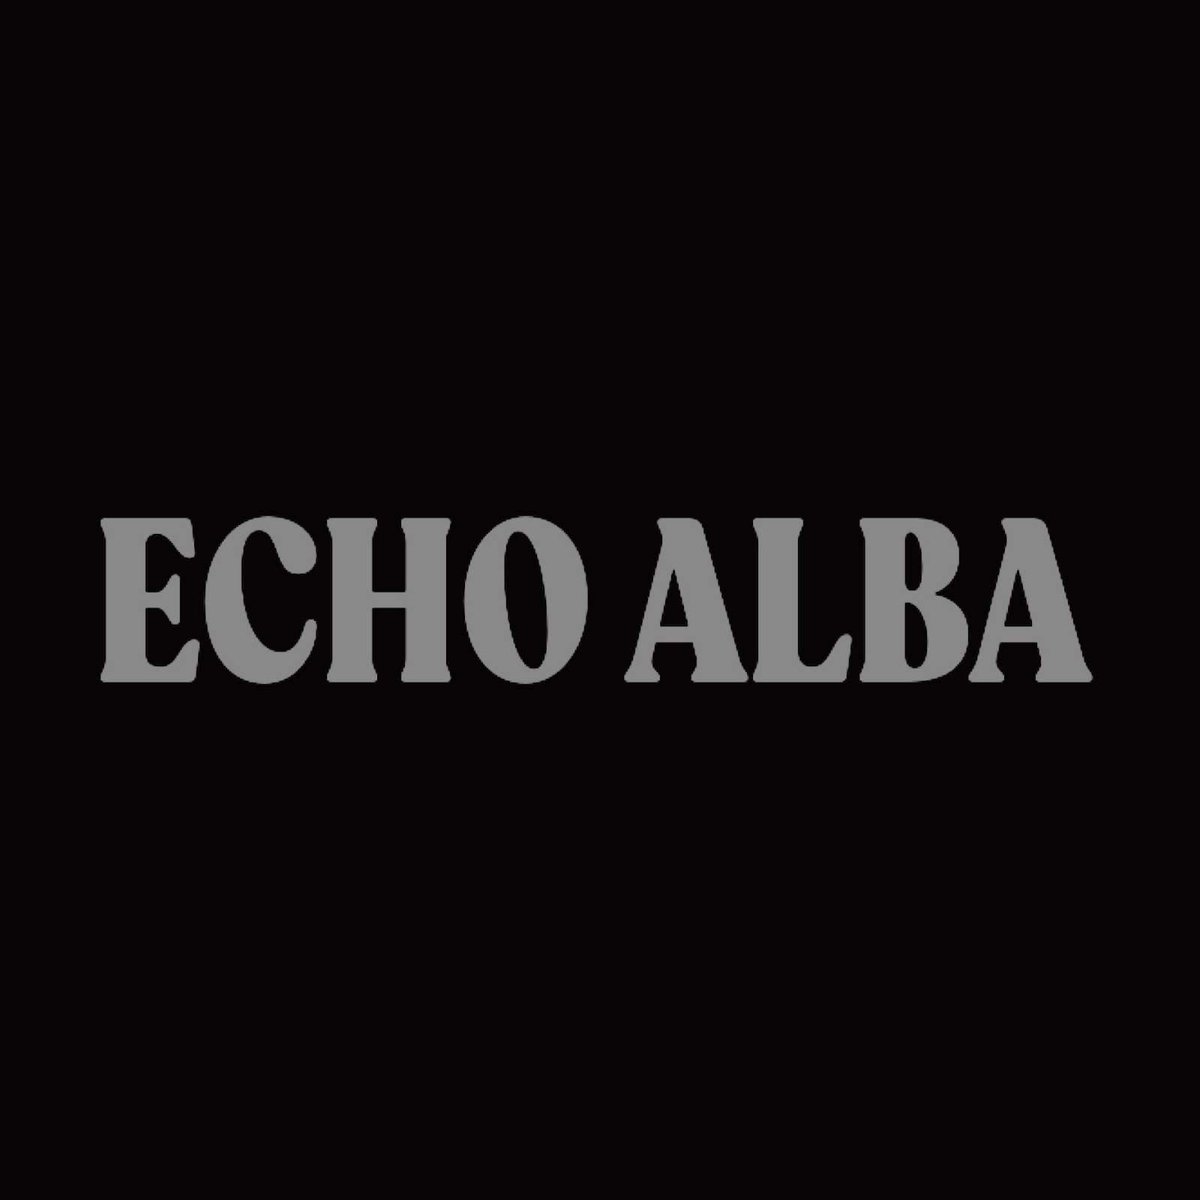 Our new group, Echo Alba’s debut single “El Fuego” is out now!　　Check out our webstore Yorosudo:yorosudo.booth.pm/items/5653592